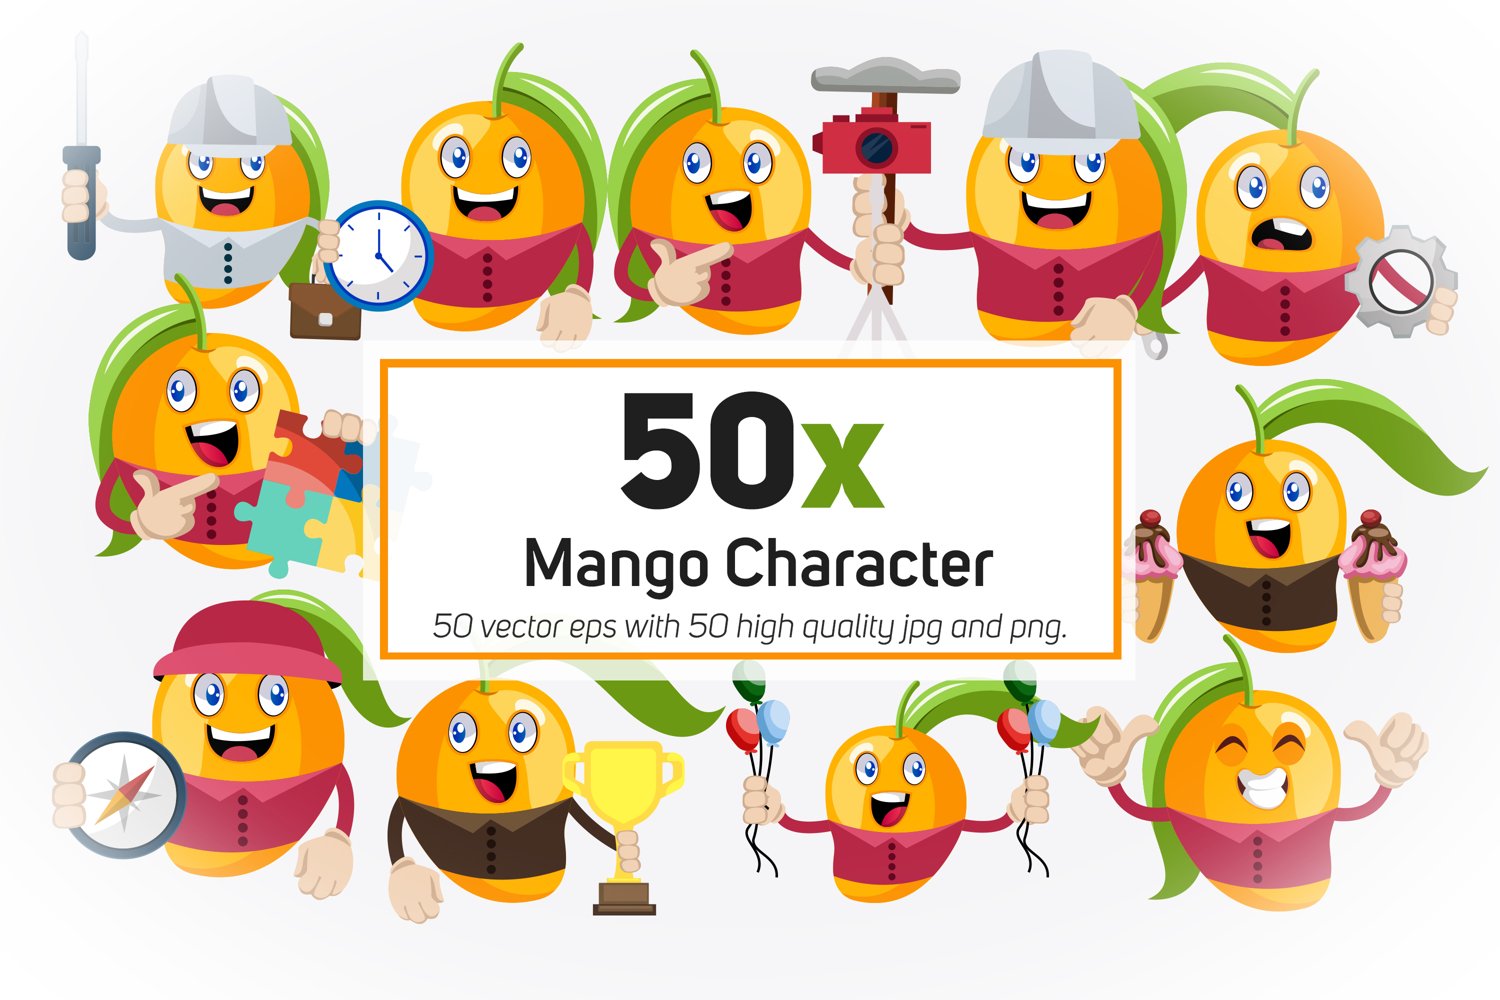 Cover image 50x Mango Character or Mascot Collection illustration.